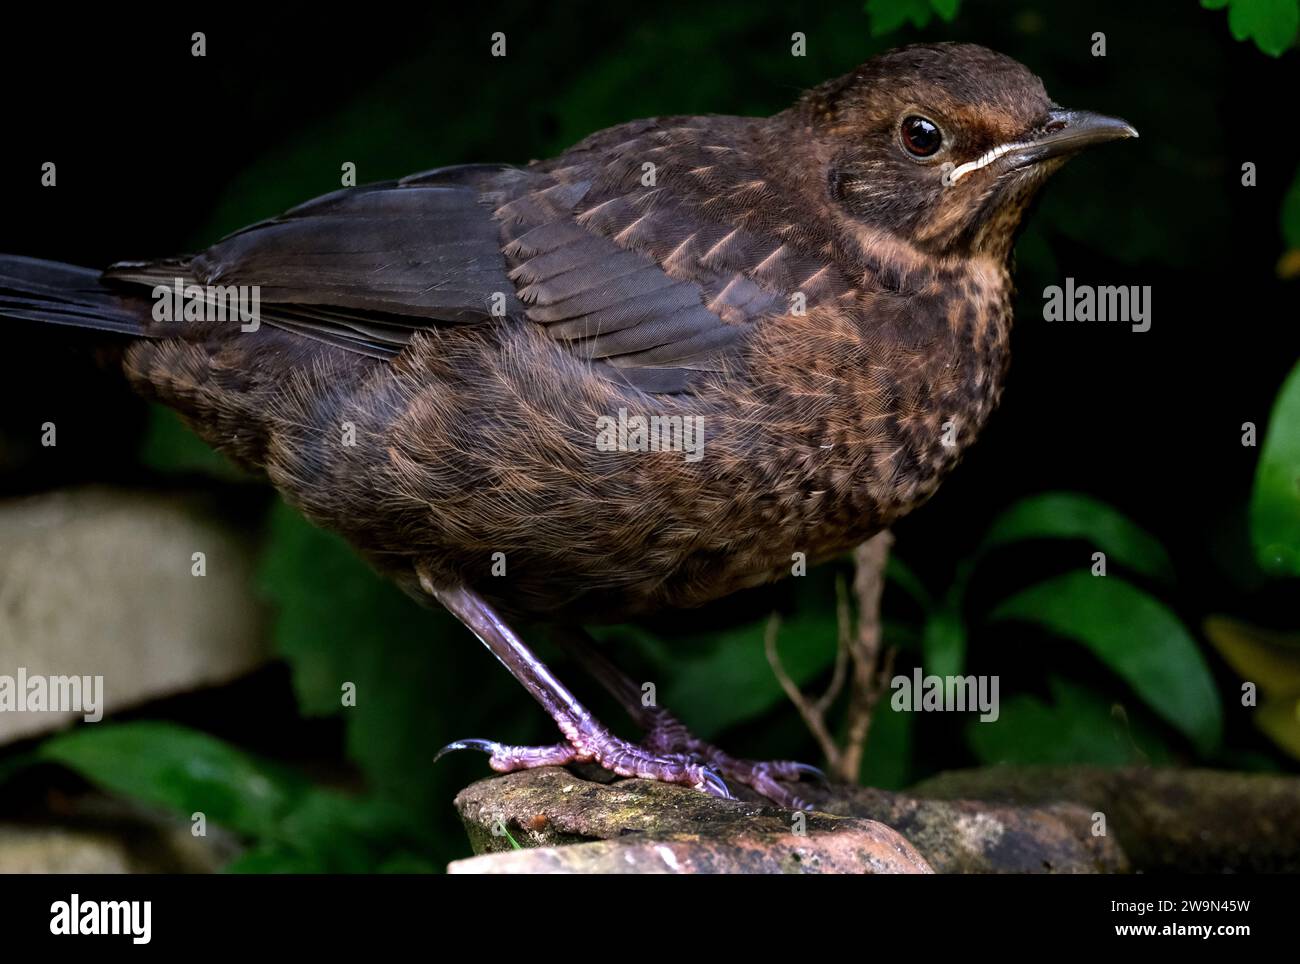 The common blackbird is a species of true thrush. It is also called the Eurasian blackbird, or simply the blackbird where this does not lead to confus Stock Photo